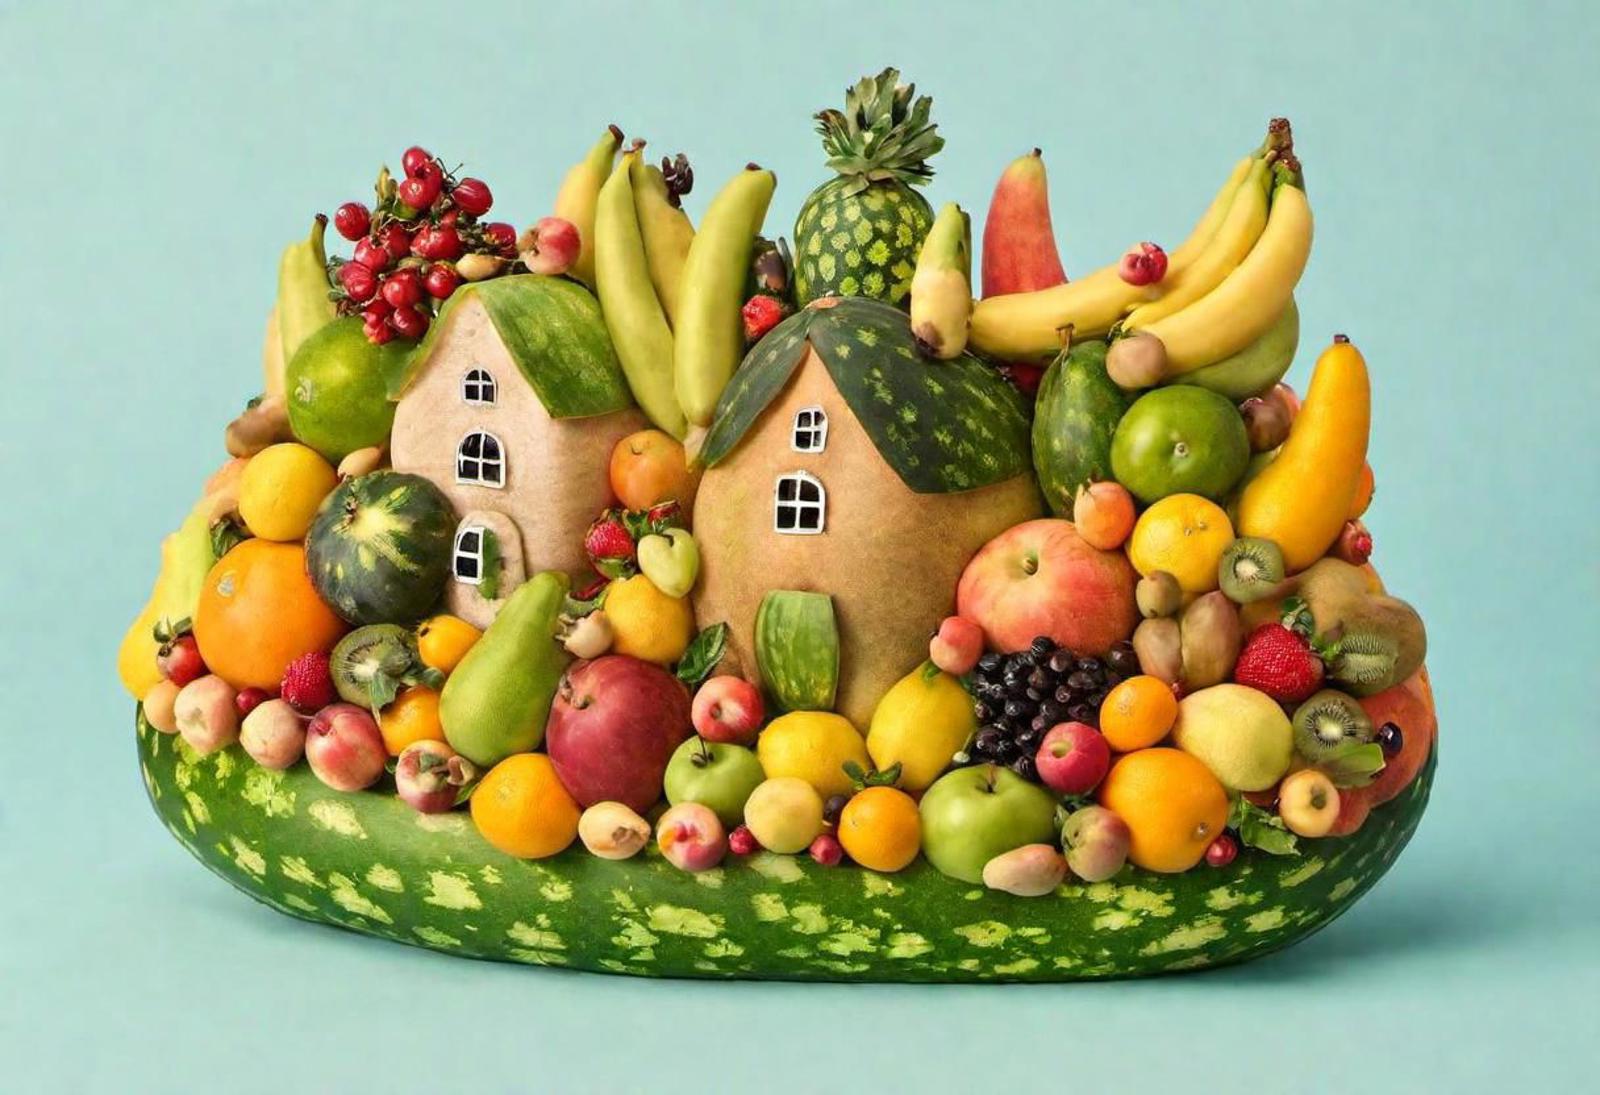 Made from fruits. SDXL image by Eradic